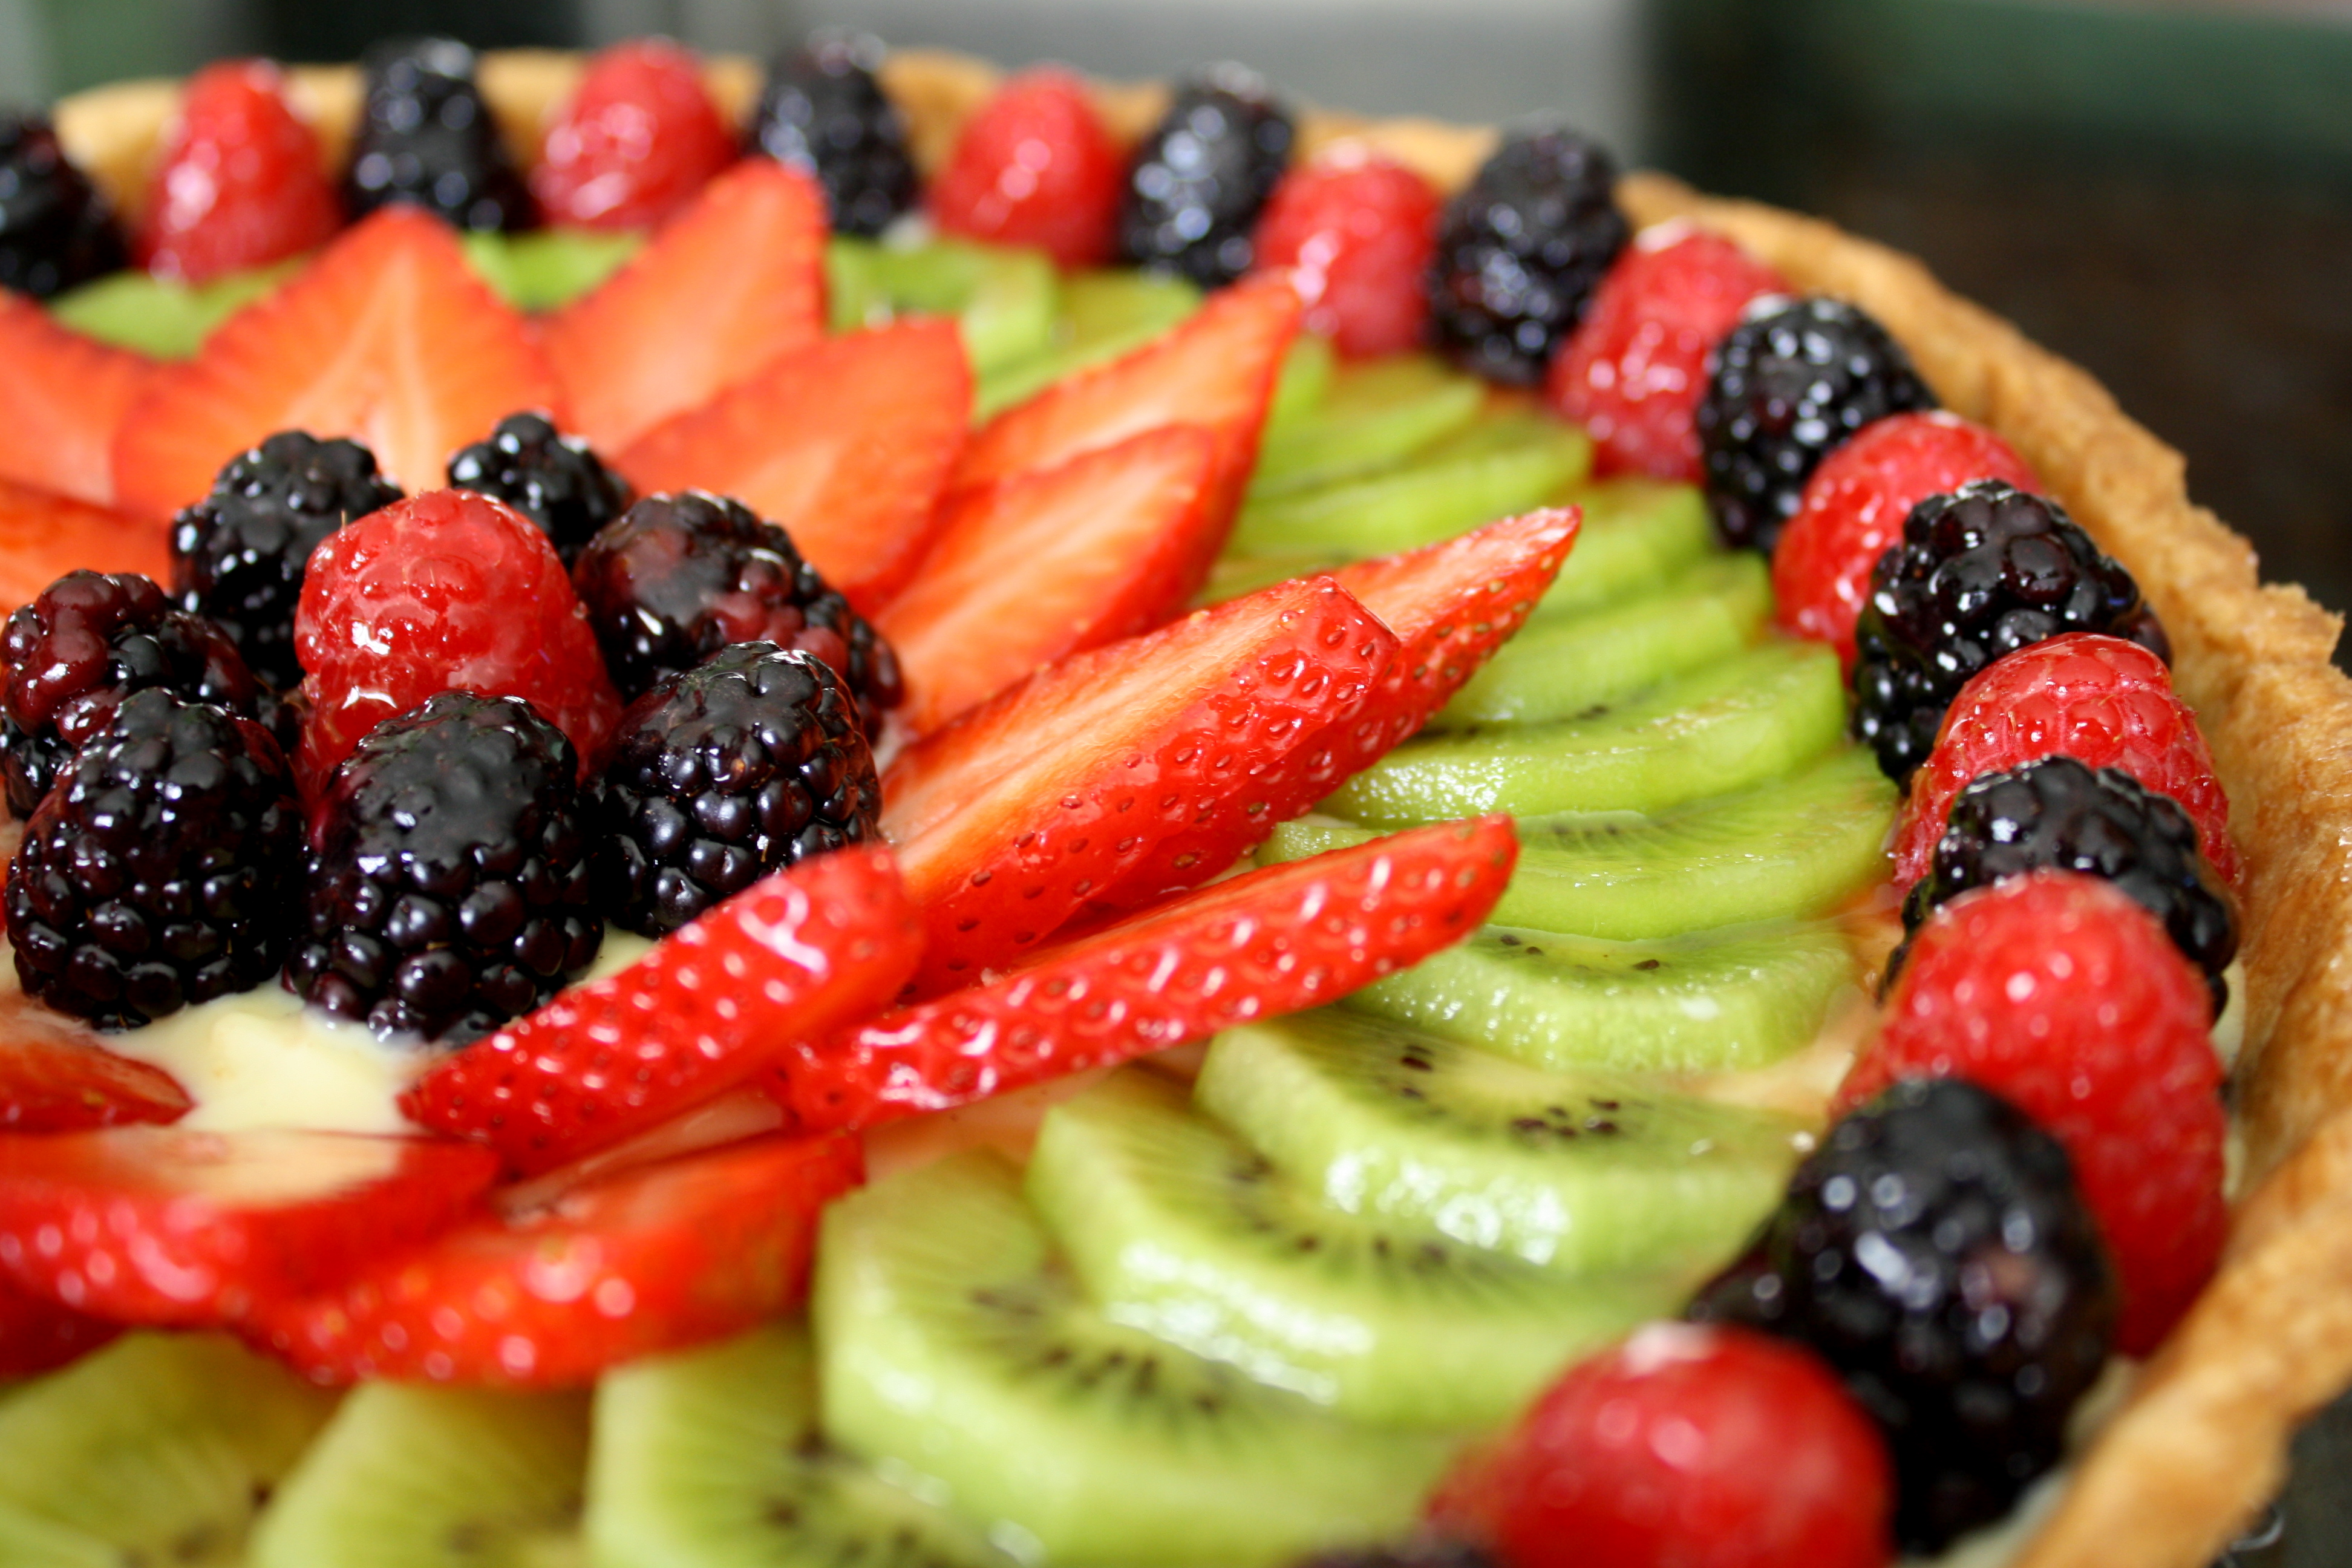  over the fruit. The shiny finish really makes this fruit tart sing